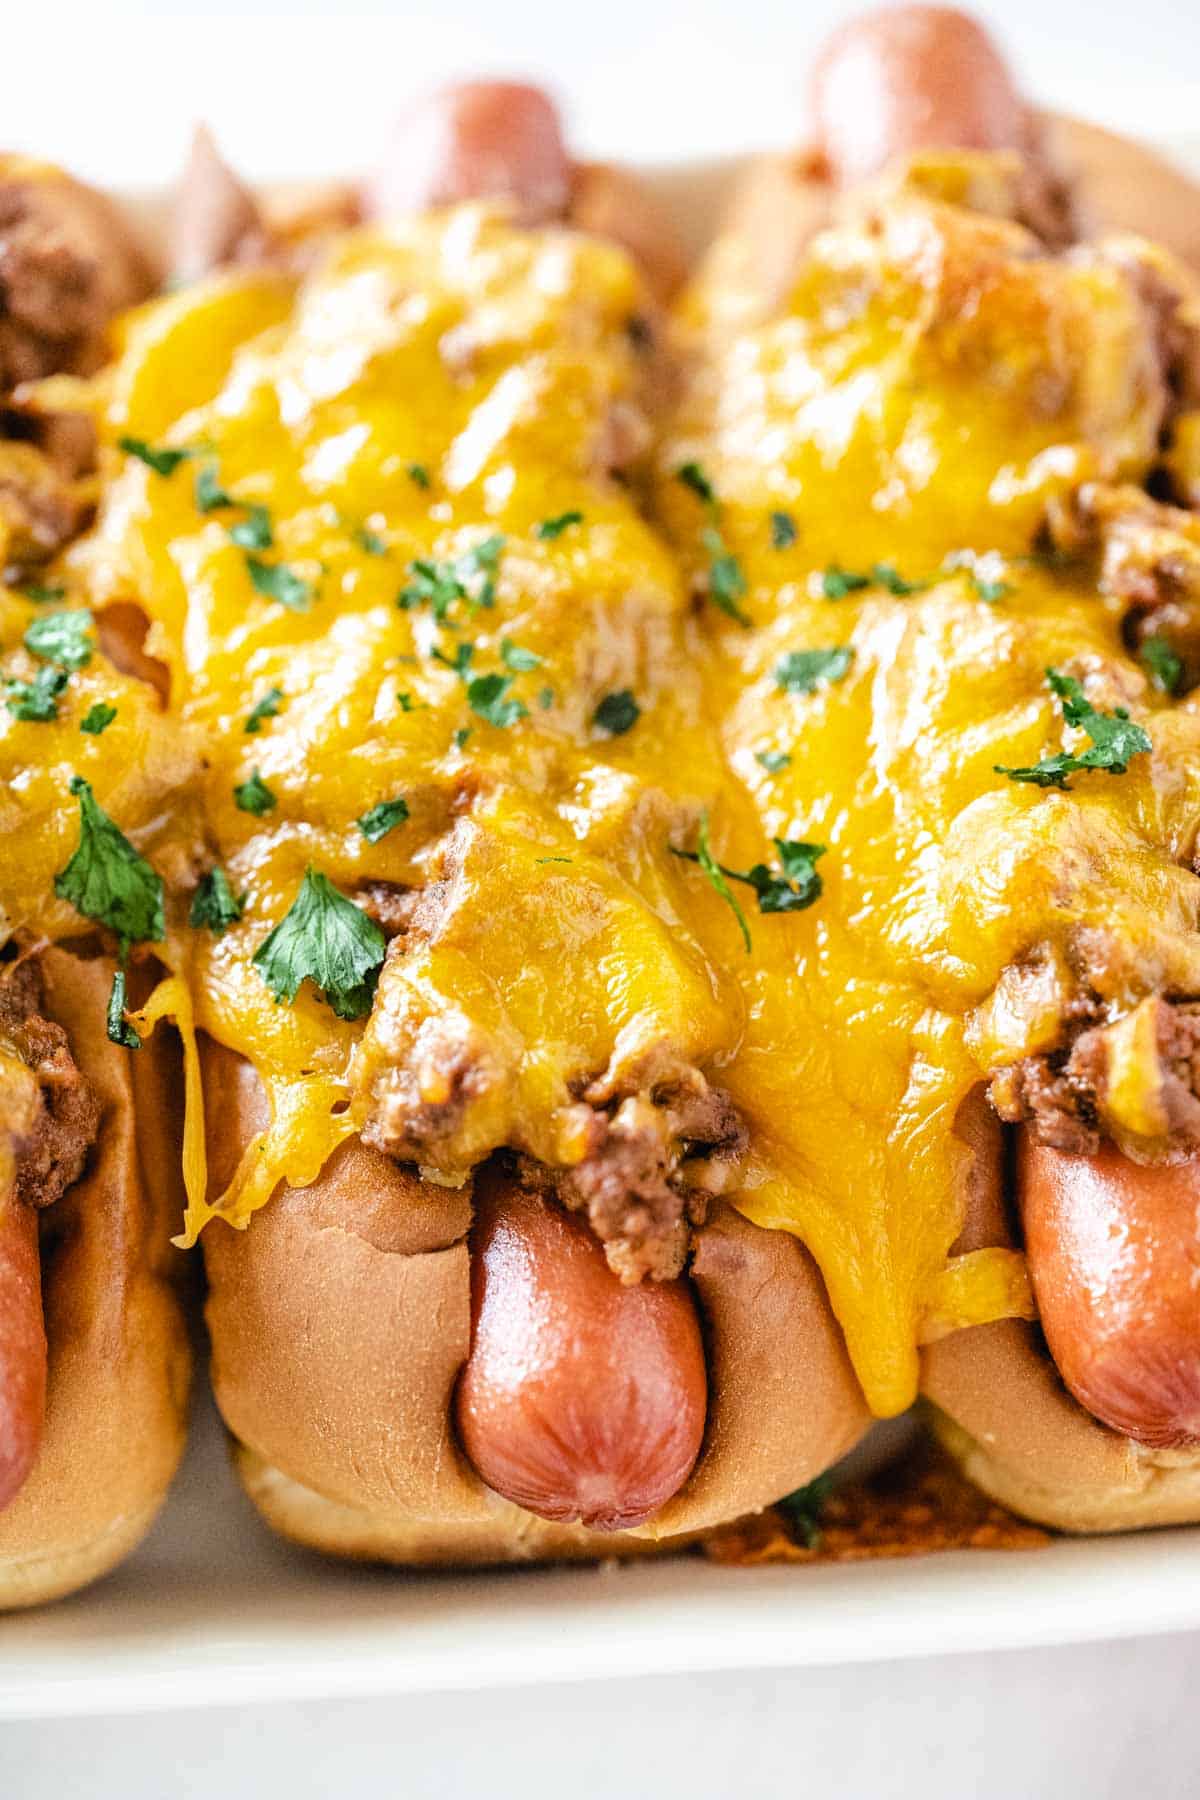 An upclose image of showing glossy hot dogs smothered in chili and gooey melted cheddar cheese garnished with parsley.